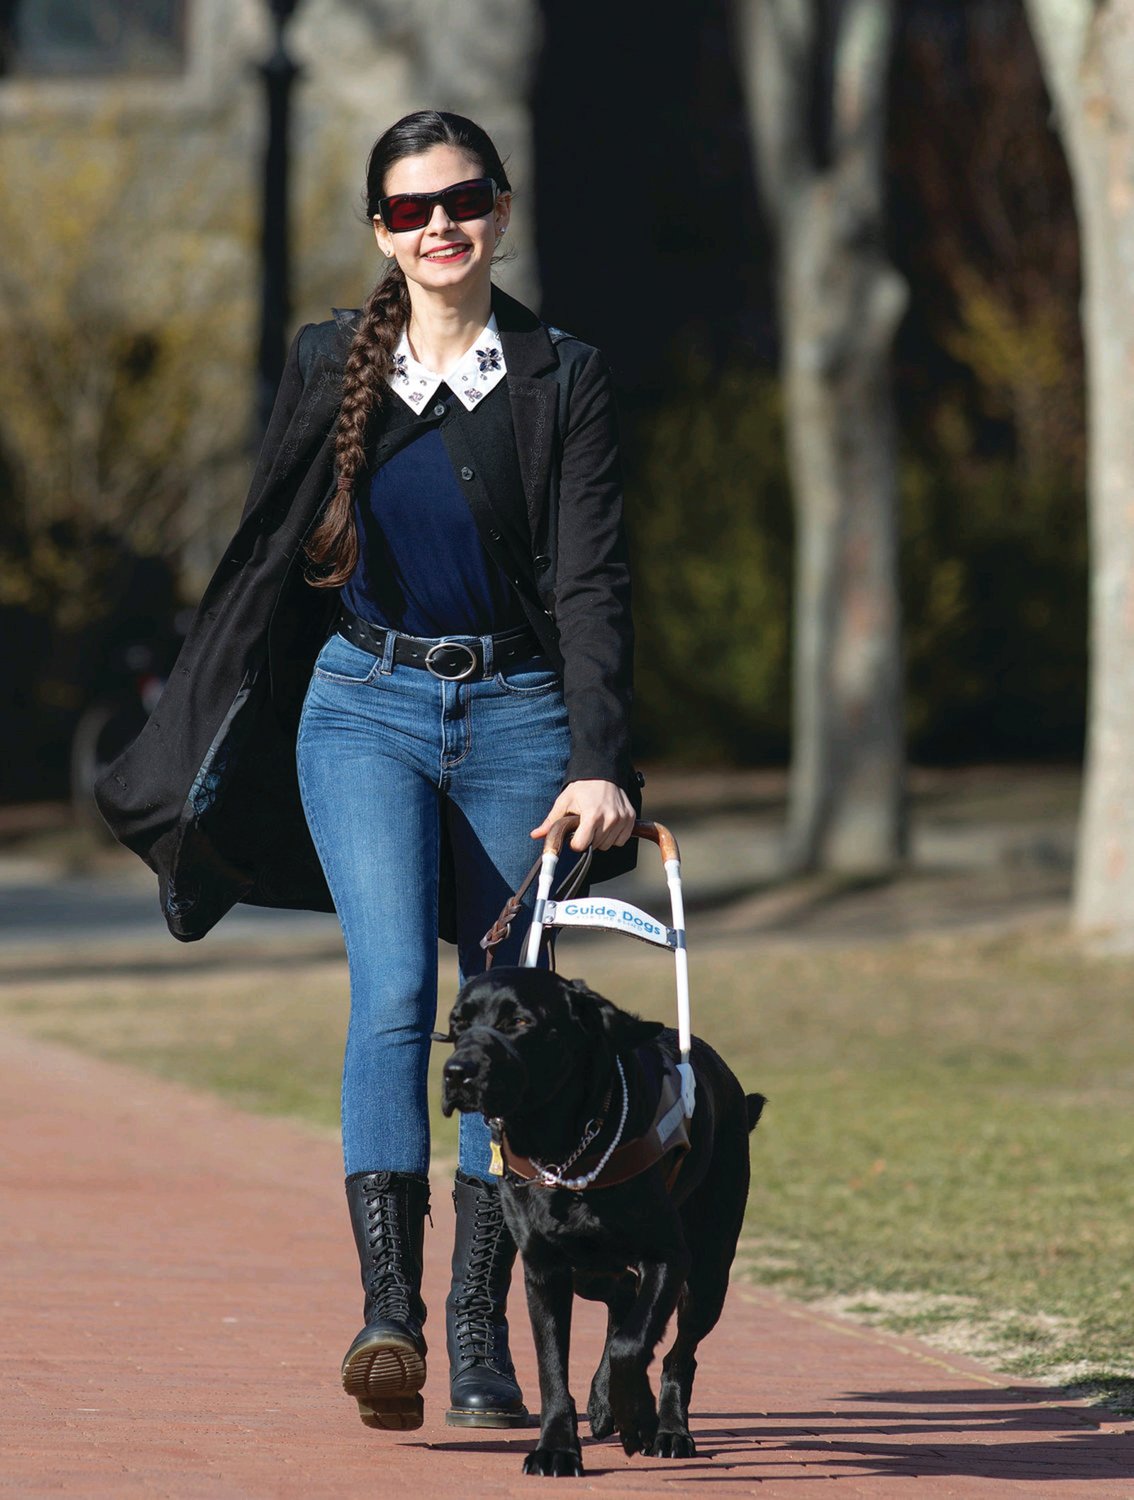 A SCHOLAR TOO: Johnston resident and URI graduate Aria Mia Loberti, pictured here with her guide dog Ingrid, traveled to London on a Fulbright grant, and is working on her doctorate at Penn State.